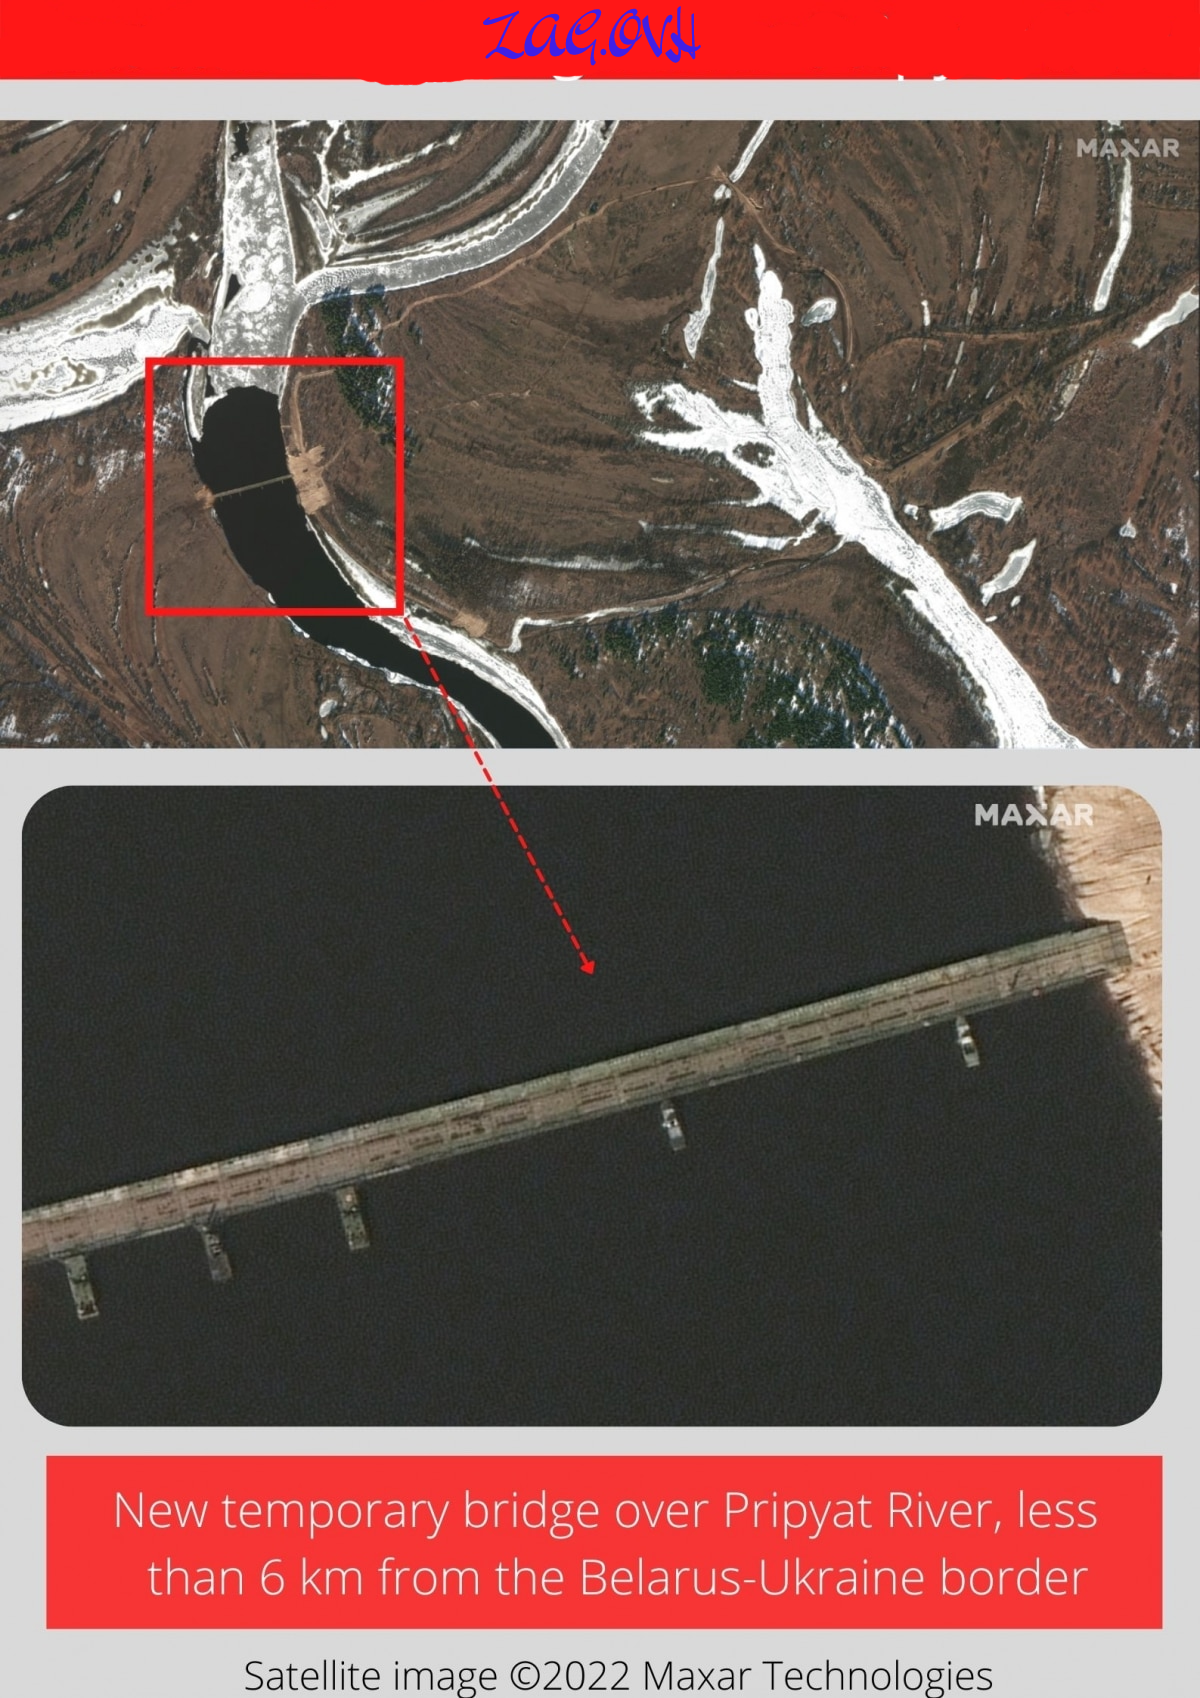 Despite Russia's claims of troop withdrawal, satellite images show a new bridge near Ukraine